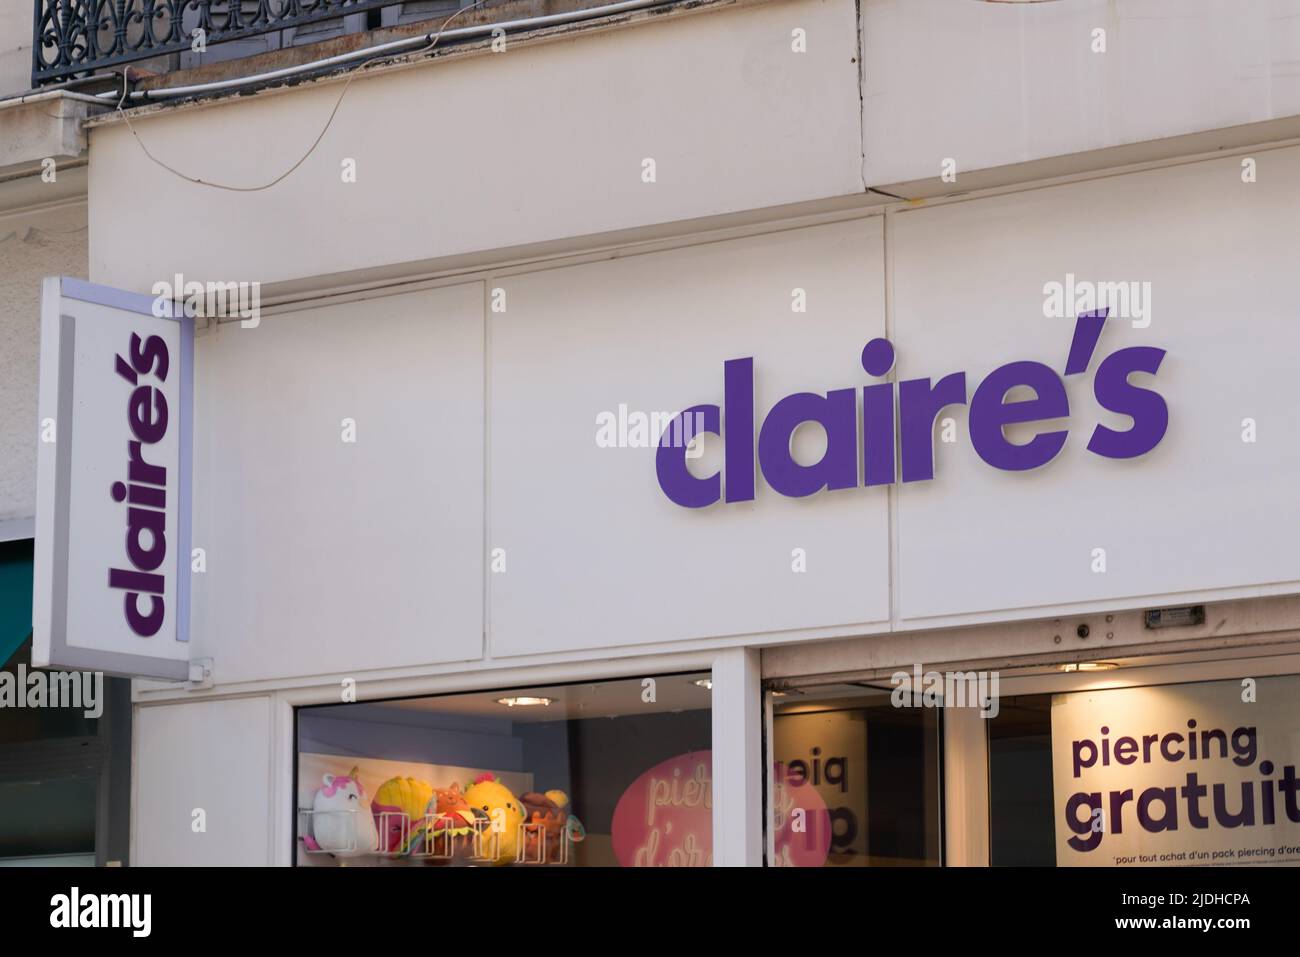 Bordeaux , Aquitaine  France - 06 12 2022 : claires store sign and brand text logo Claire's on wall facade shop retailer accessories and jewelry Stock Photo